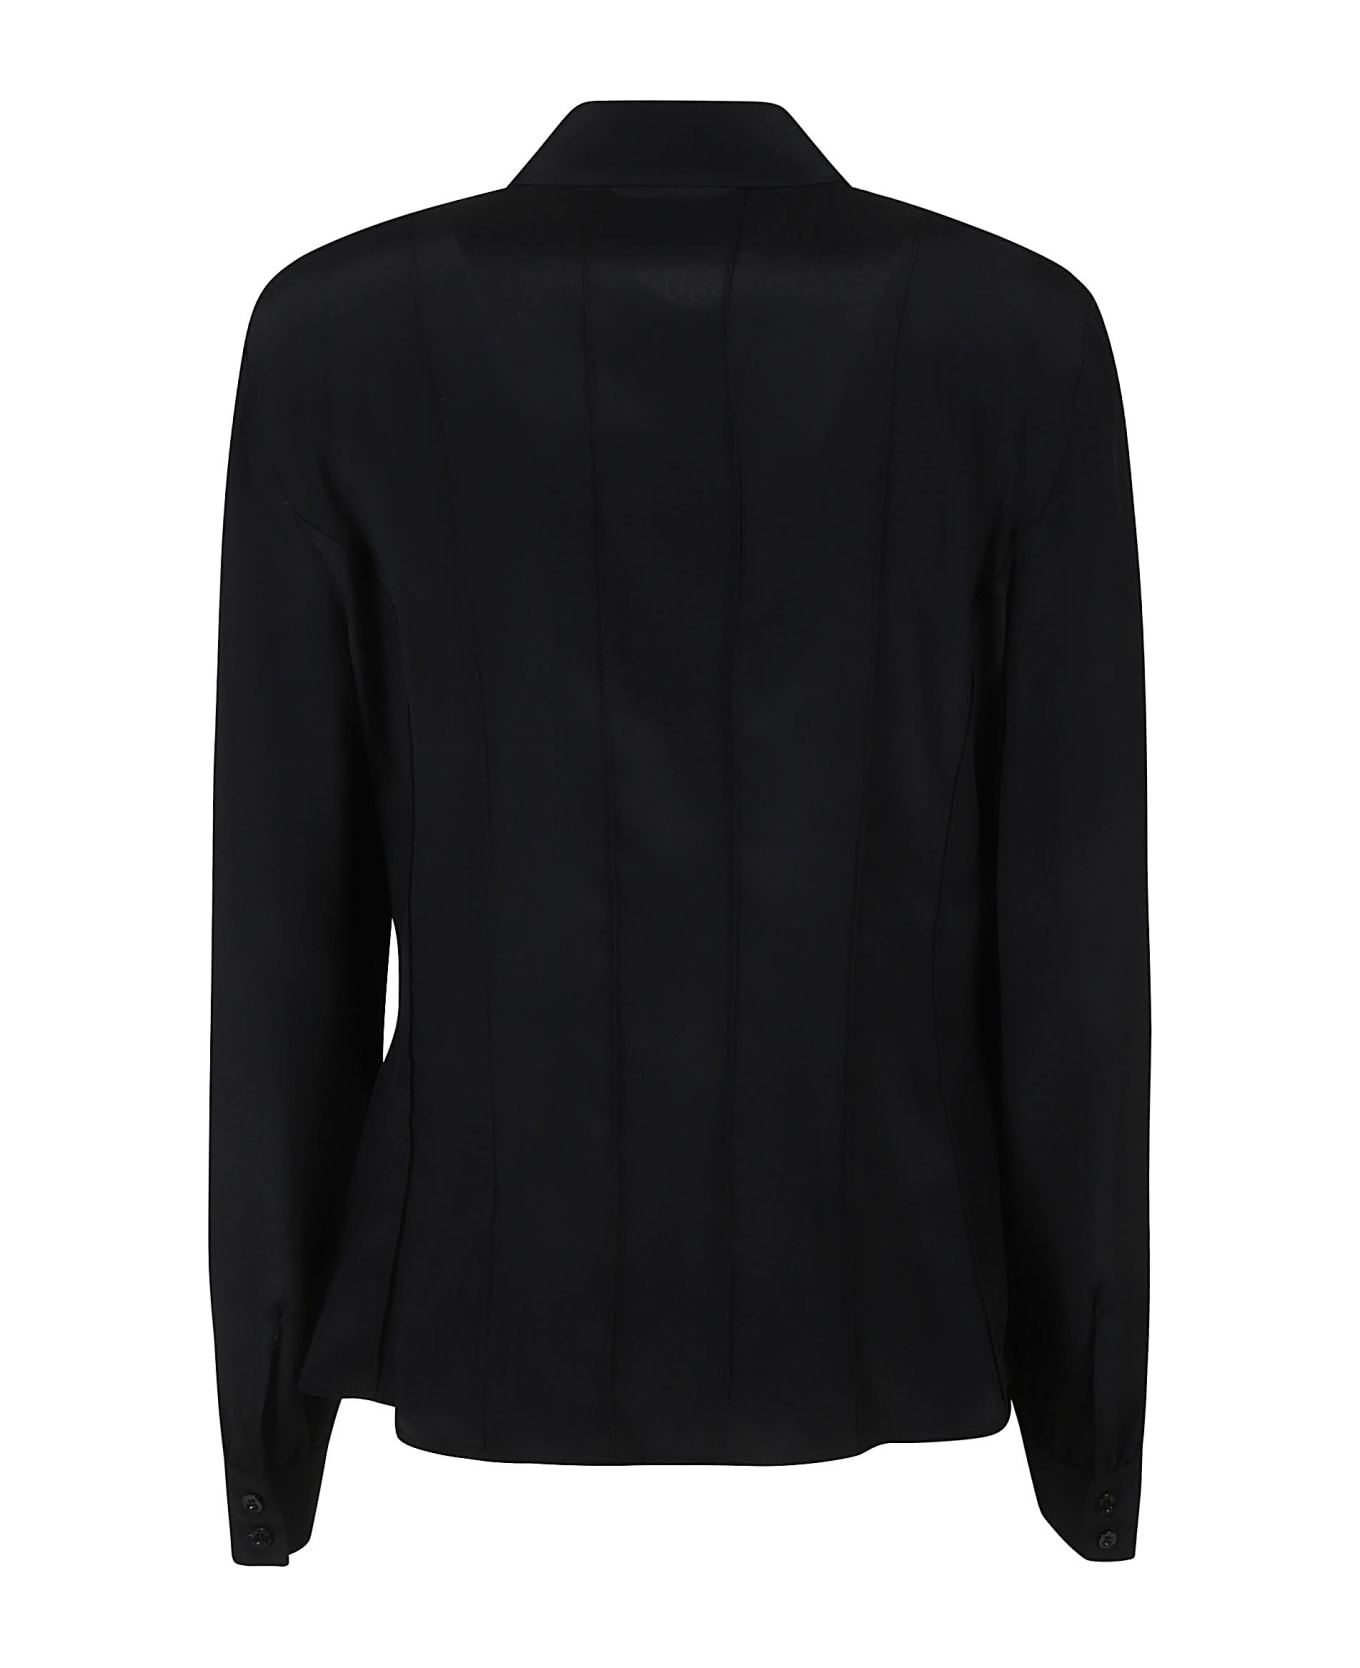 Boutique Moschino Pleated Shirt - Black